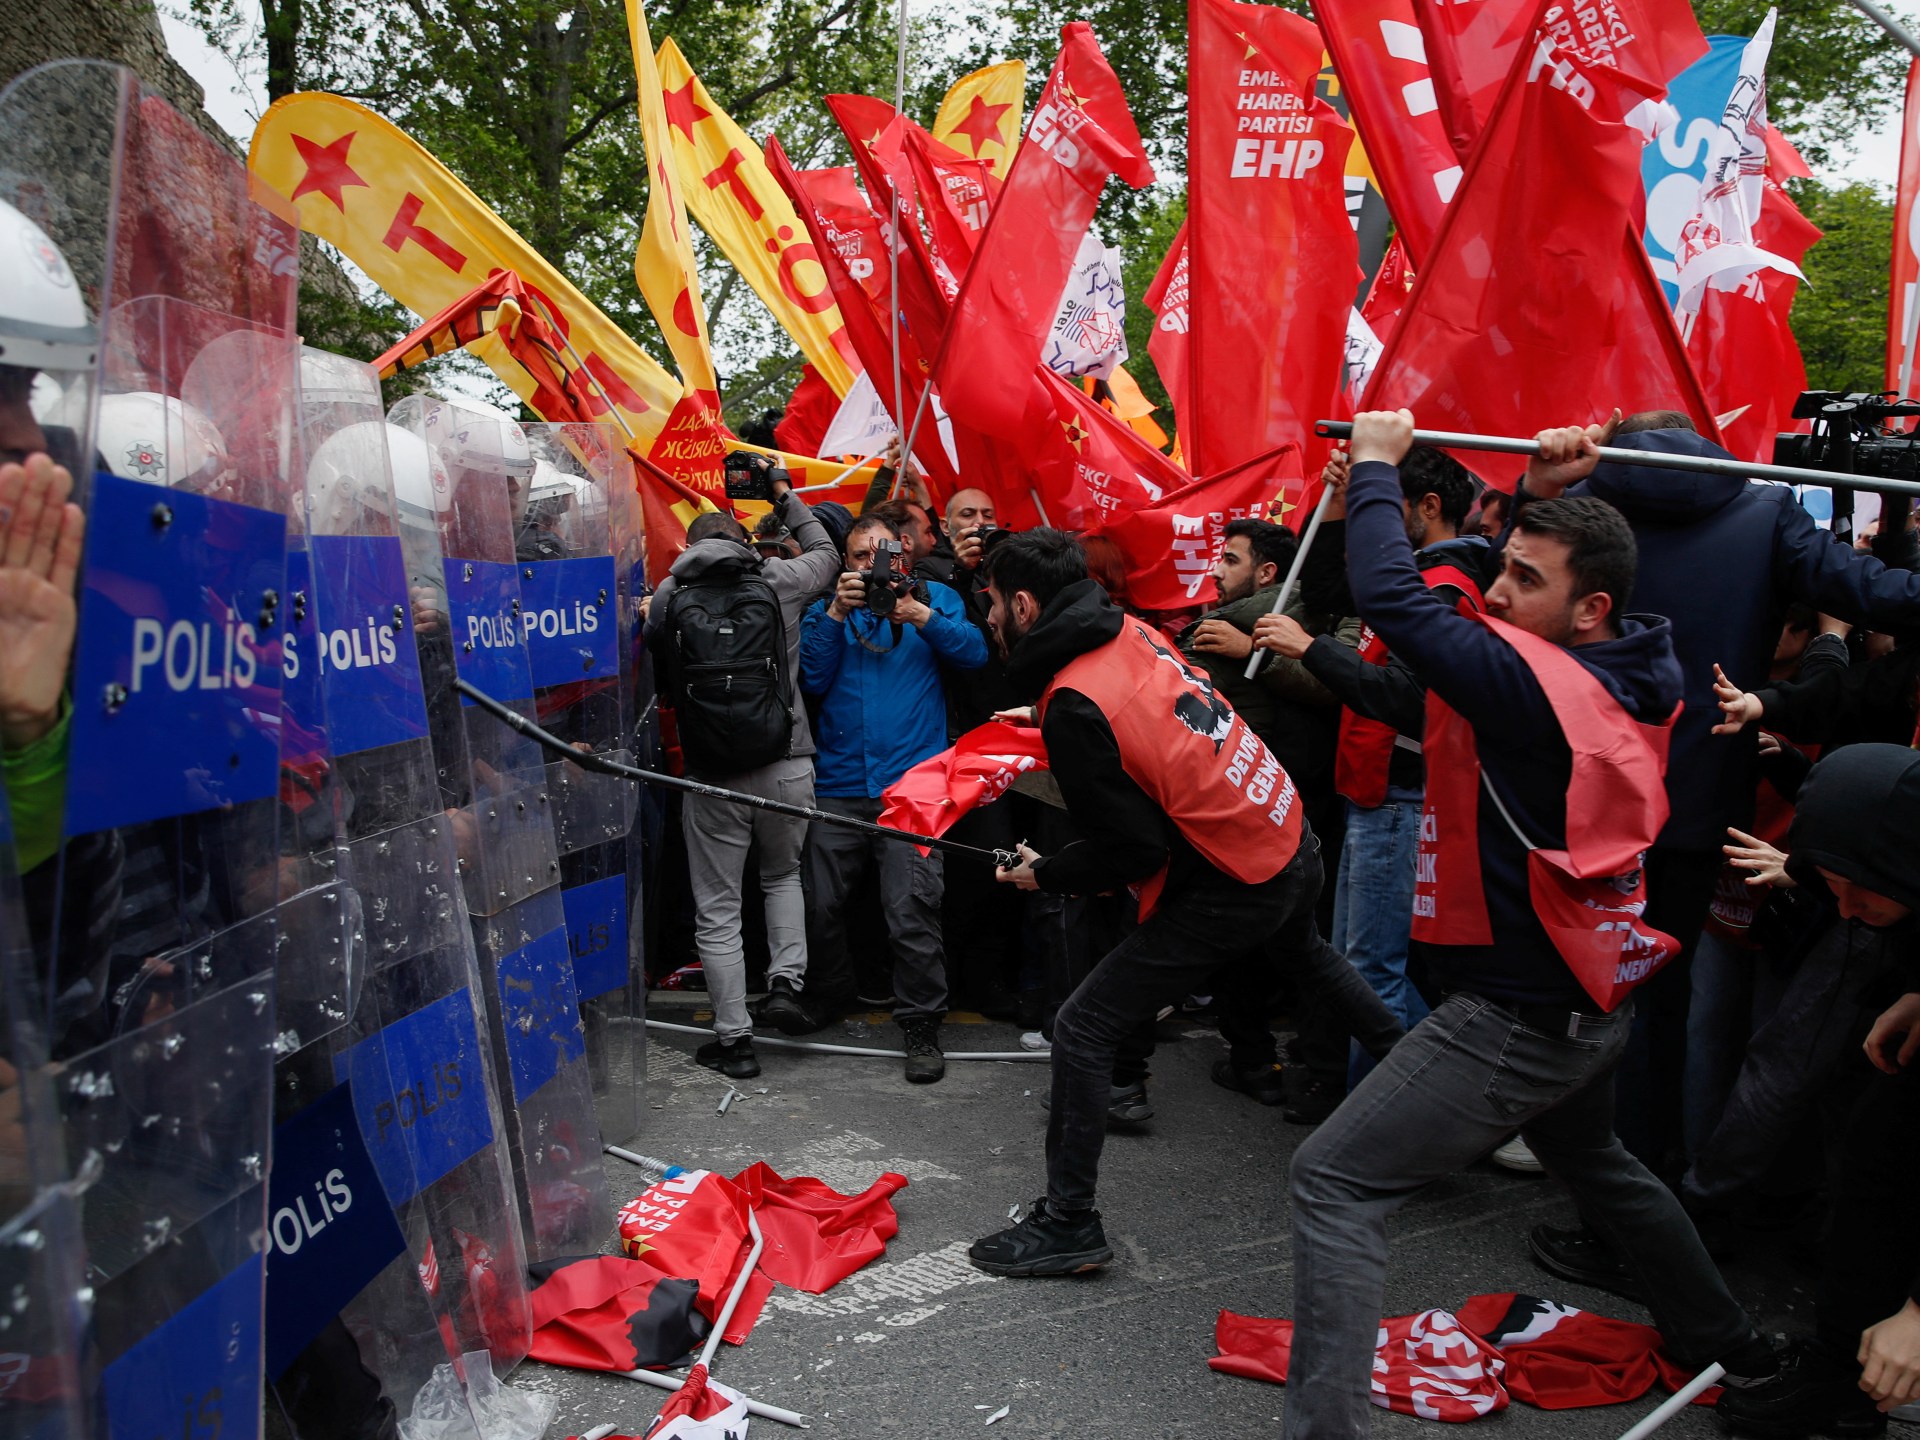 At least 200 arrested at May Day clashes in Turkey | Newsfeed